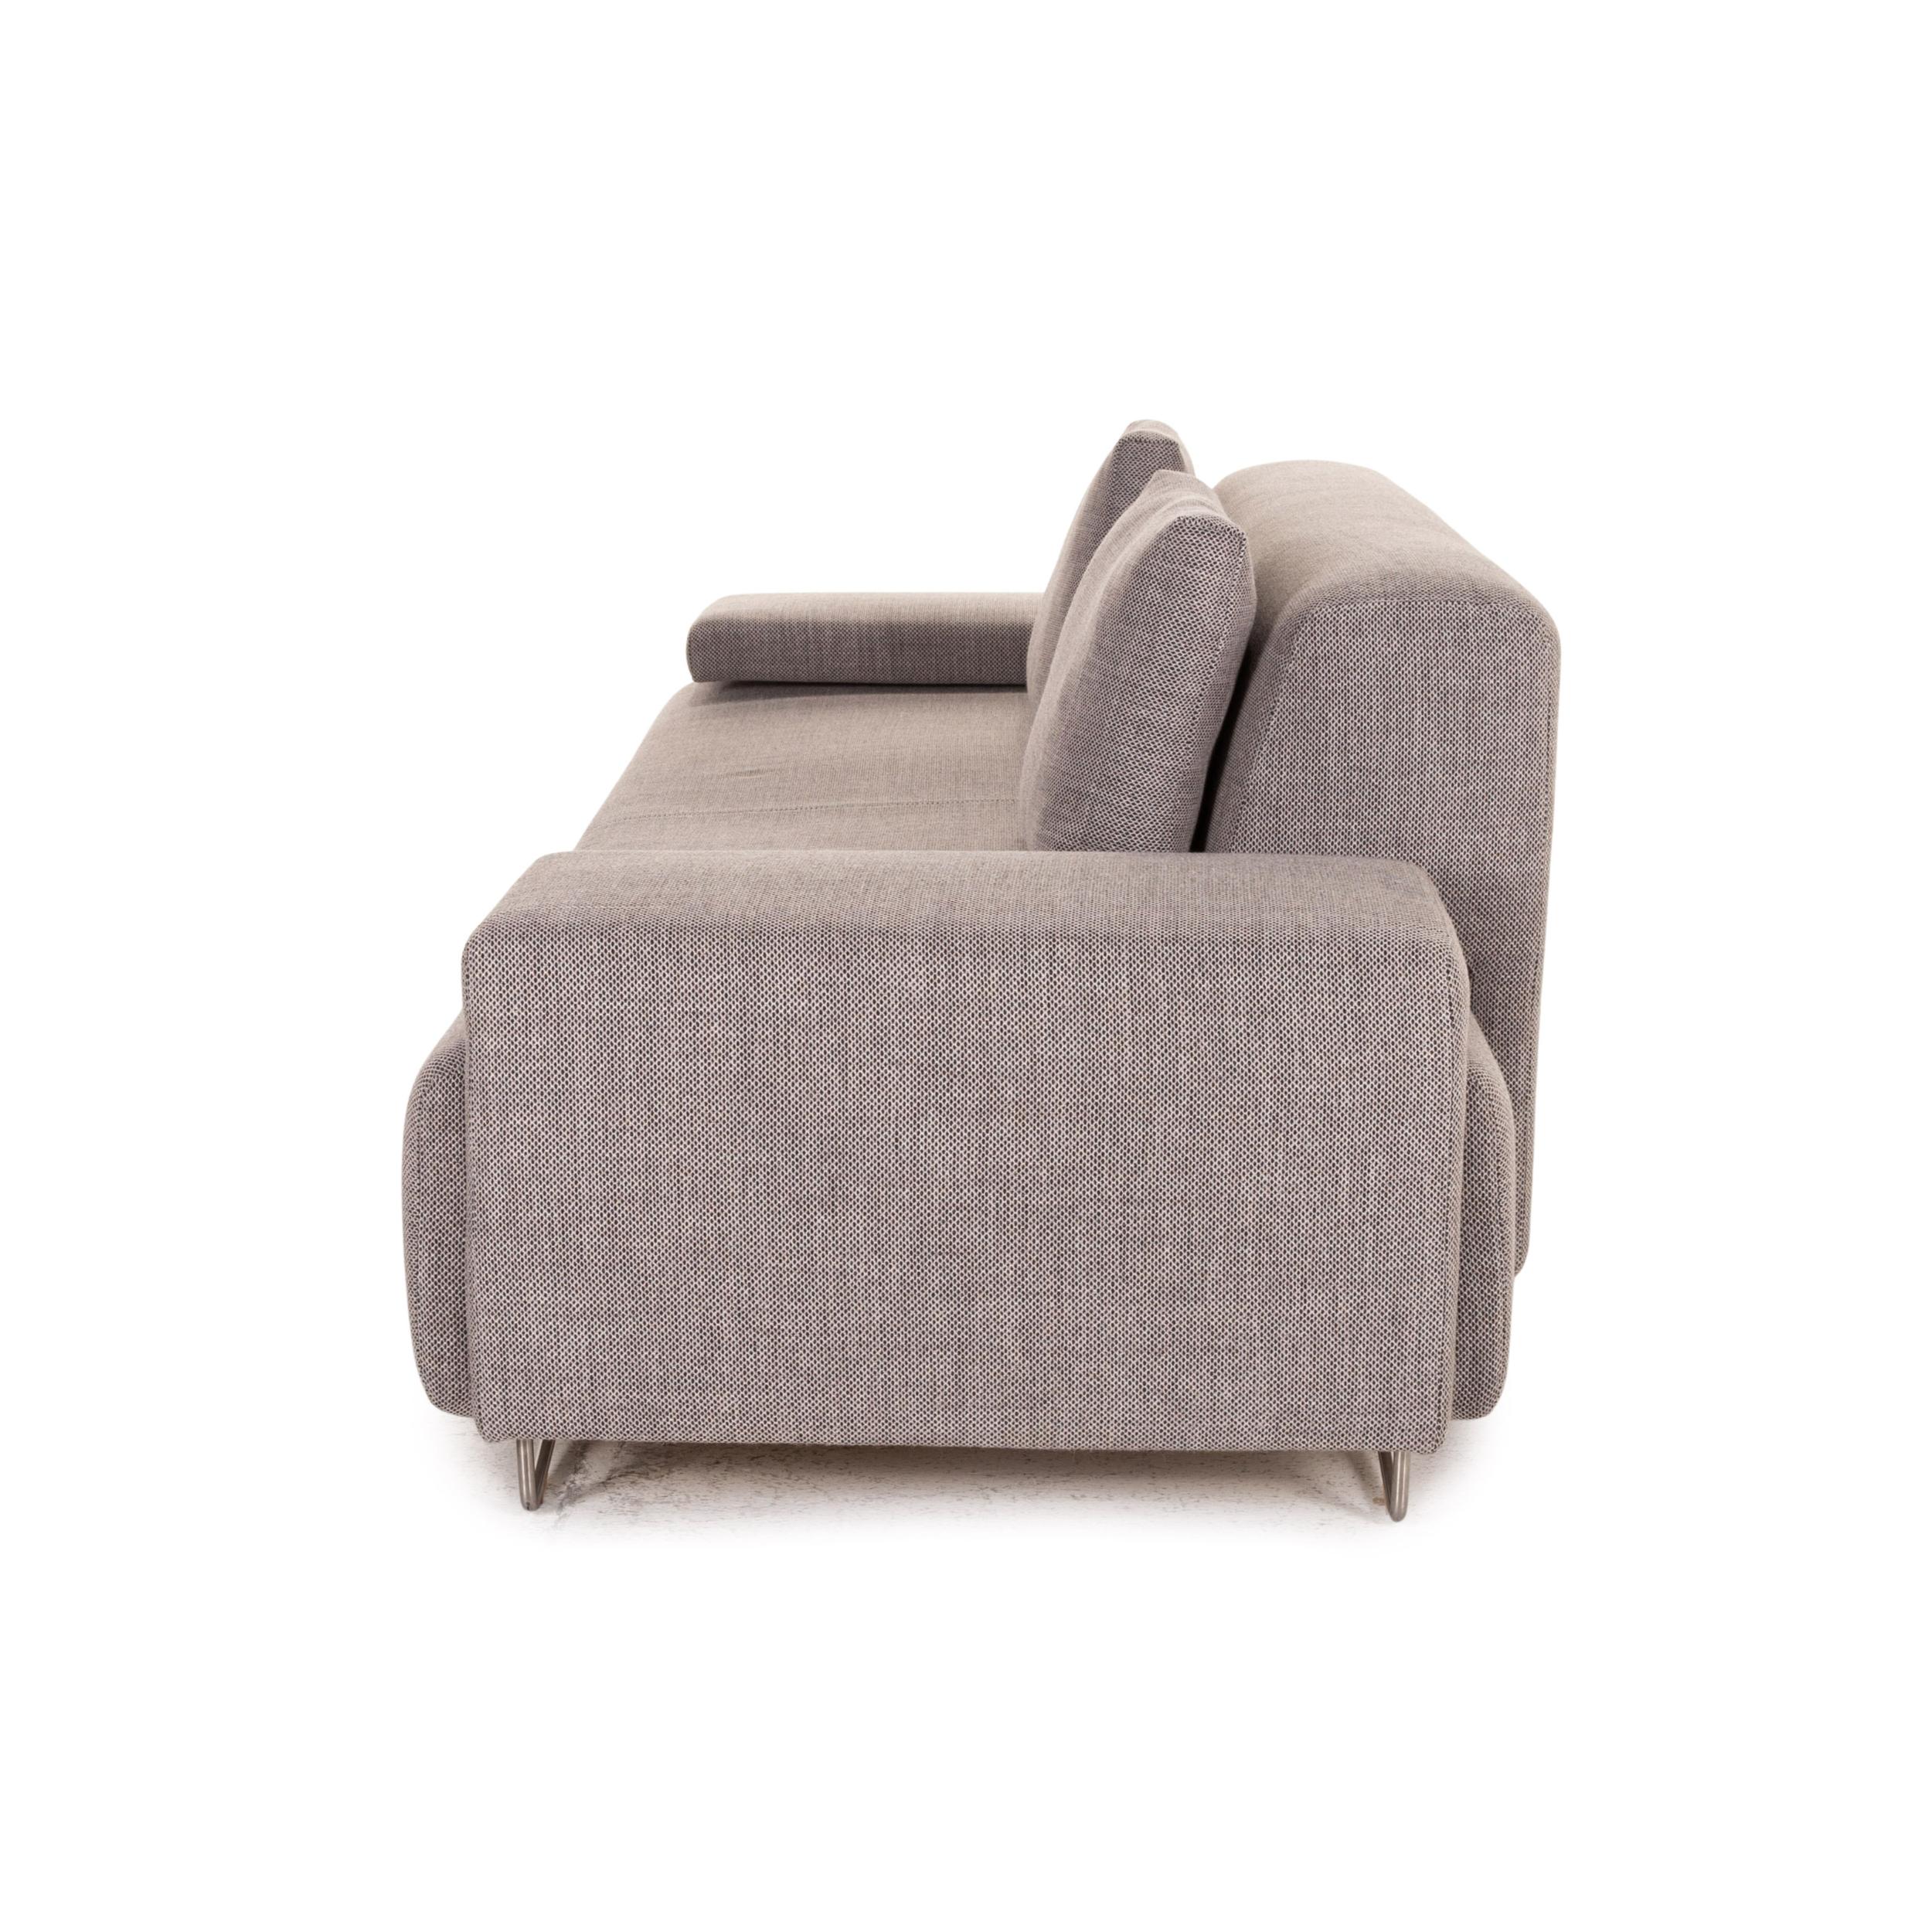 Moroso Lowland Fabric Sofa Three Seater Gray Couch For Sale 2